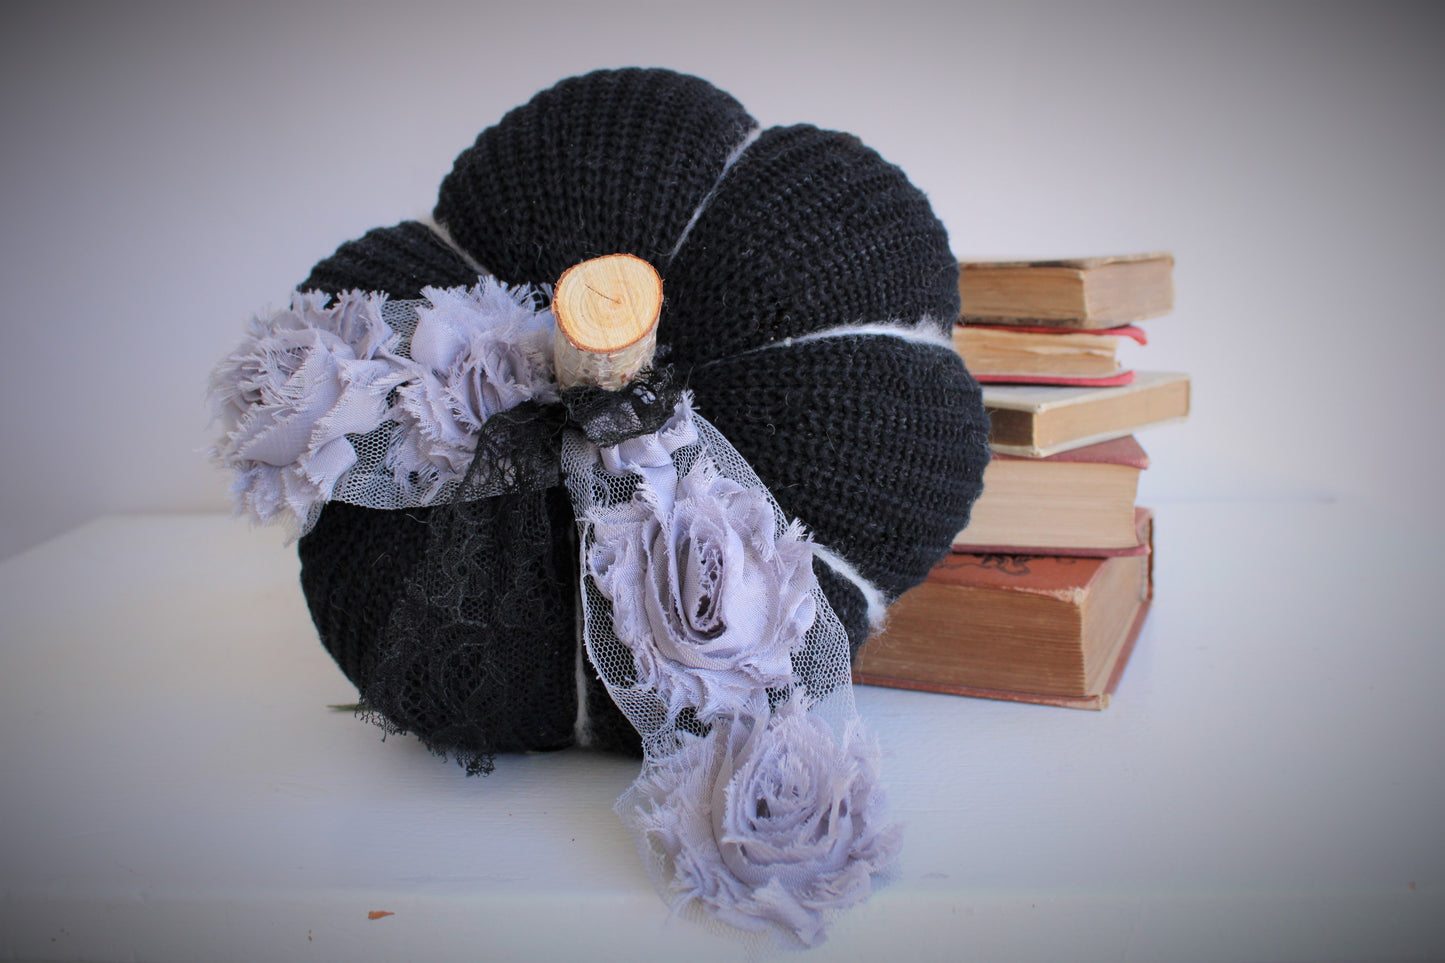 Pumpkin Pillow in Black, Embellished with Gray Roses, Black Lace and Wooden Stem